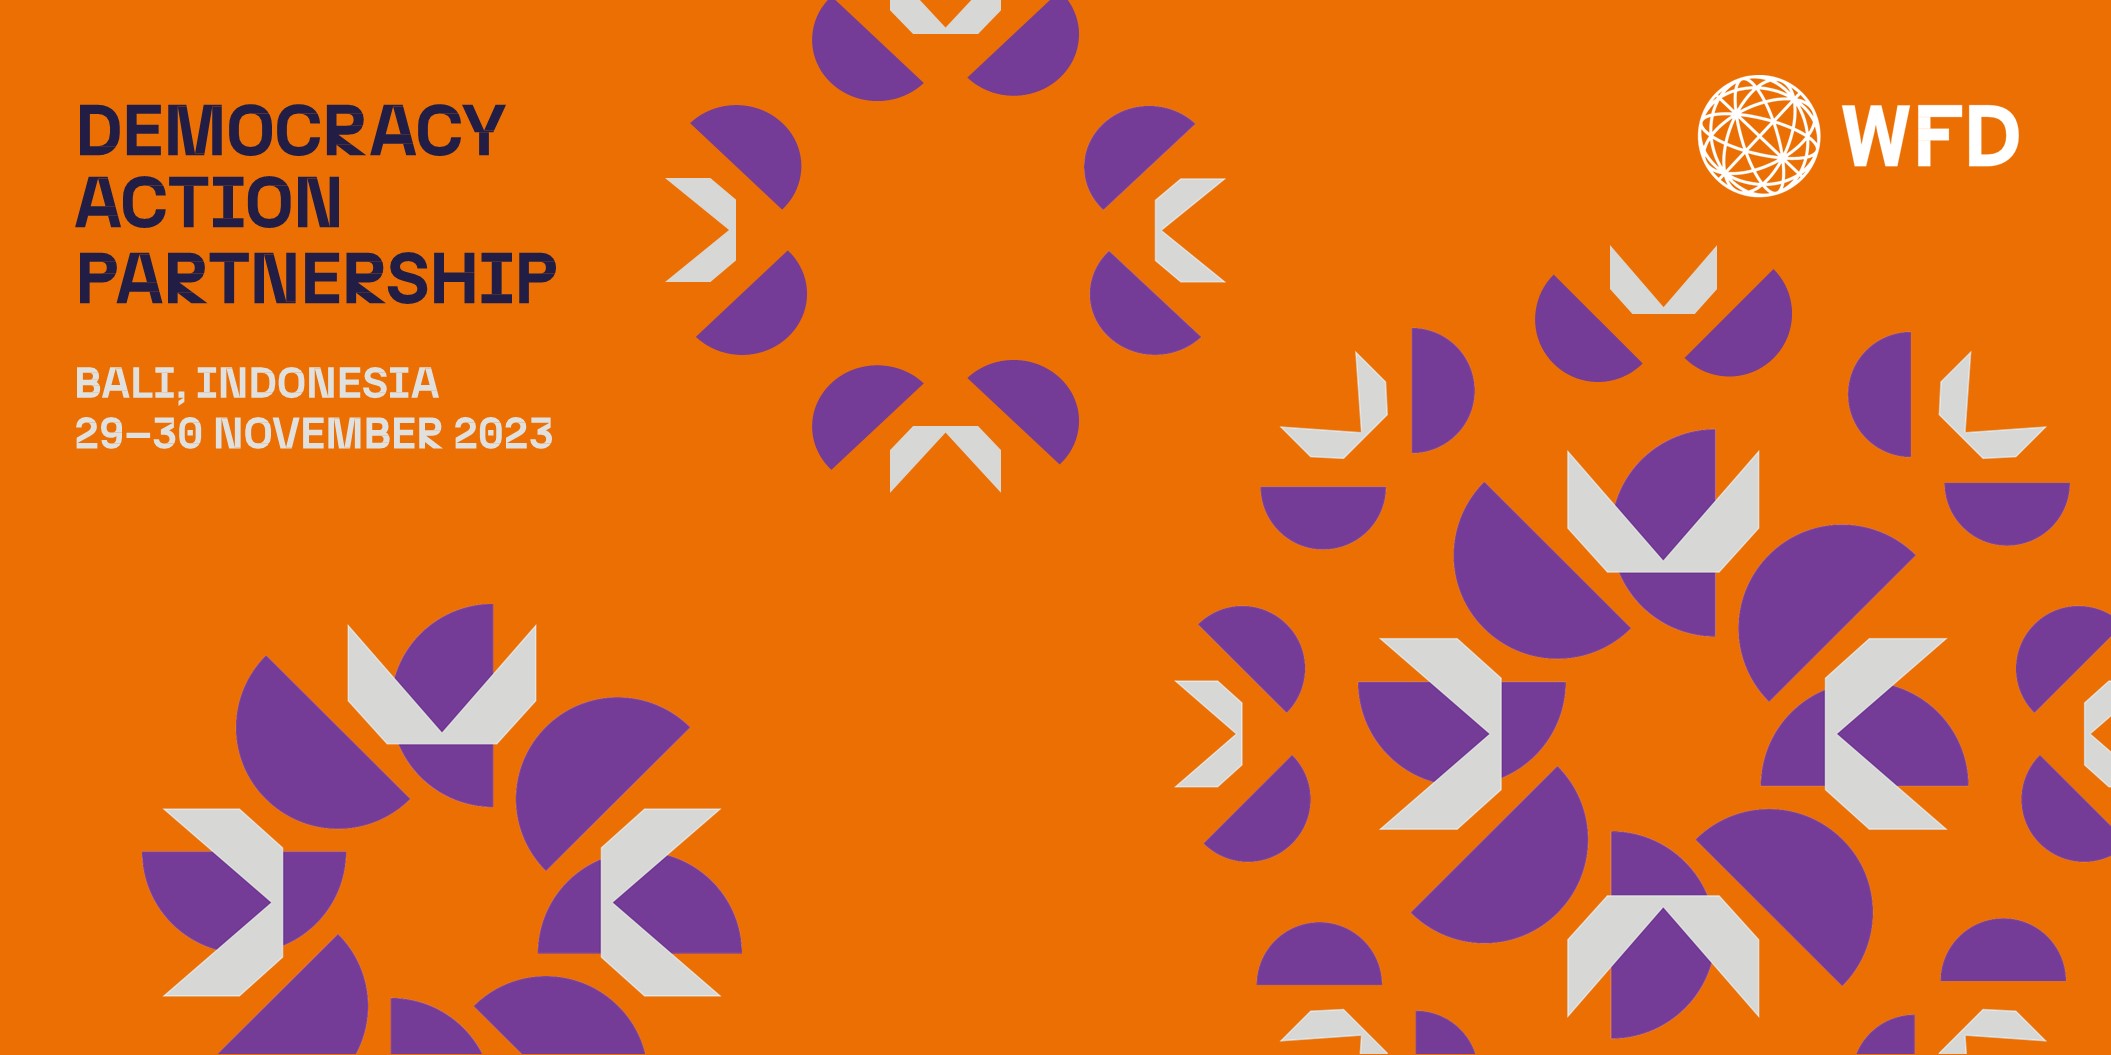 Text saying Democracy action partnership bali indonesia 29-30 November 2023 on an orange background with purple and grey floral shapes